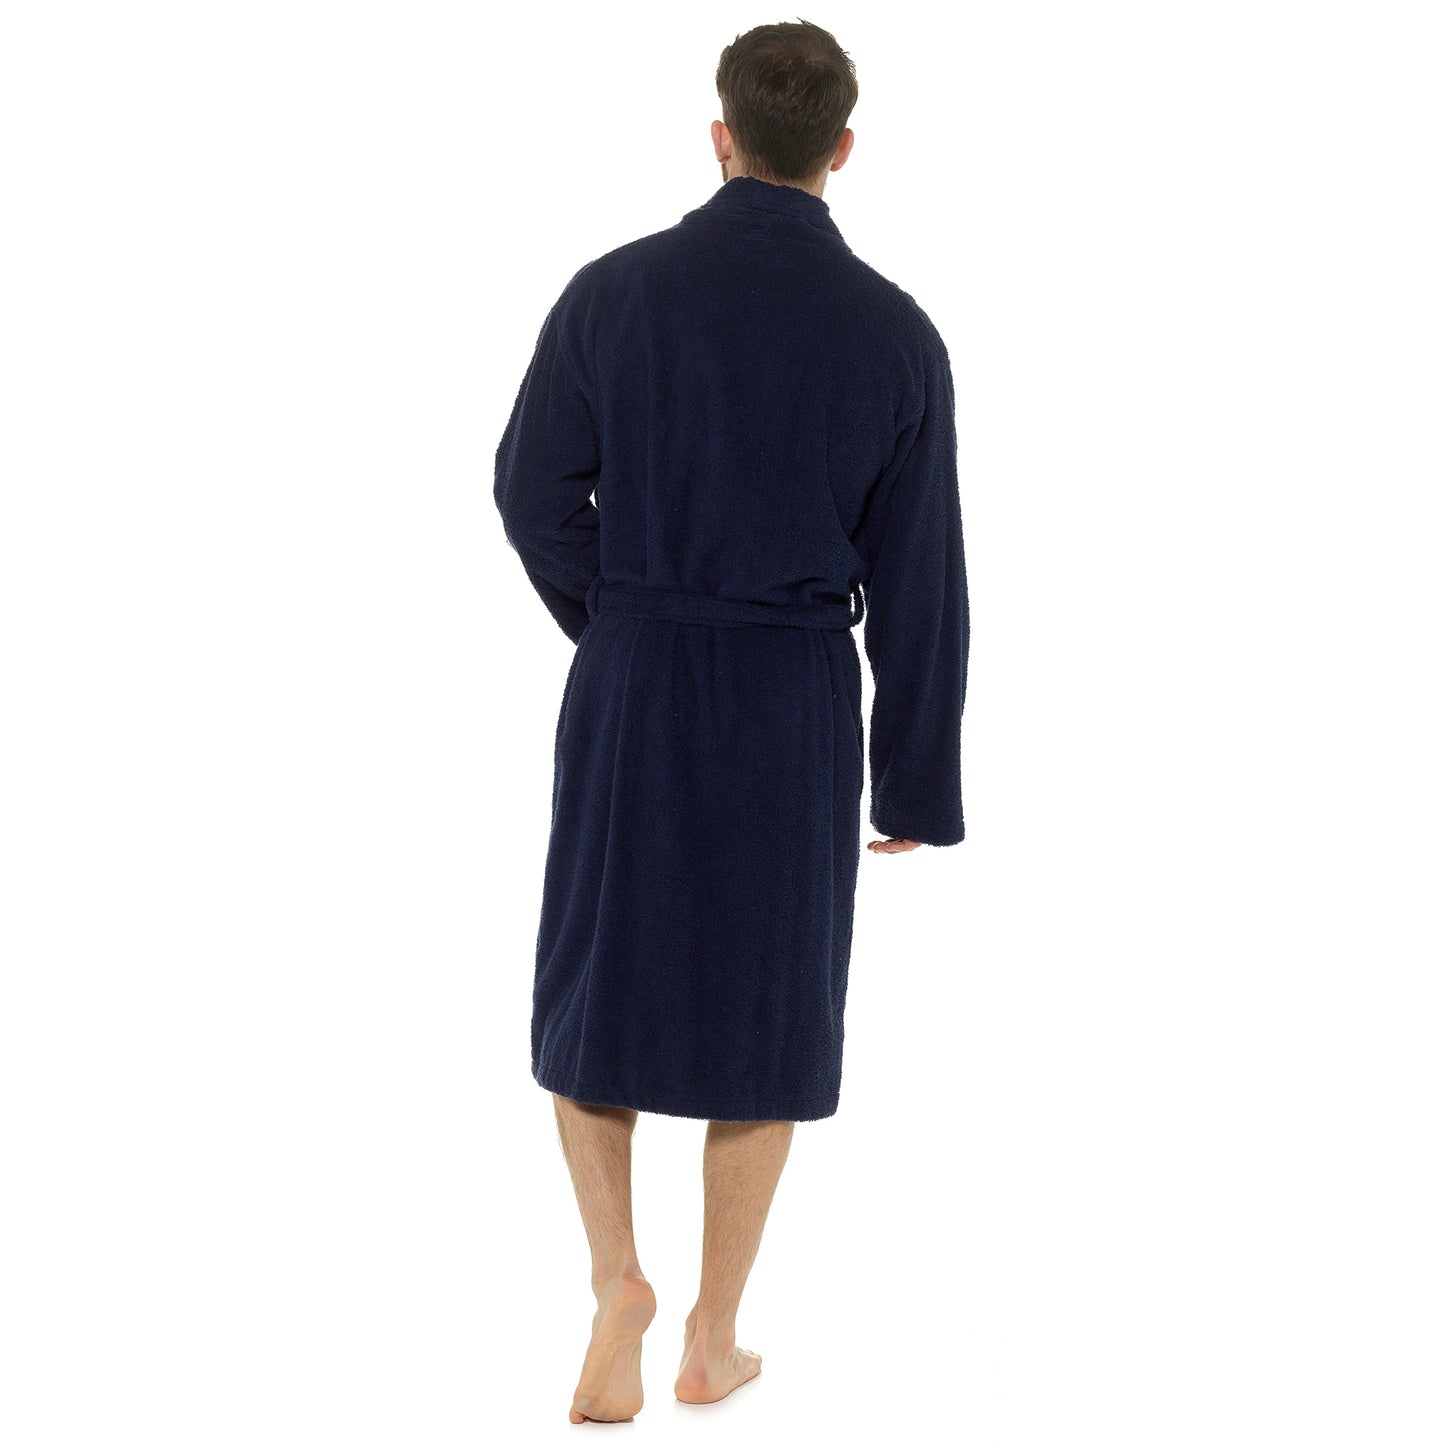 Men's 100% Cotton Towelling Spa Bath Robe Dressing Gown